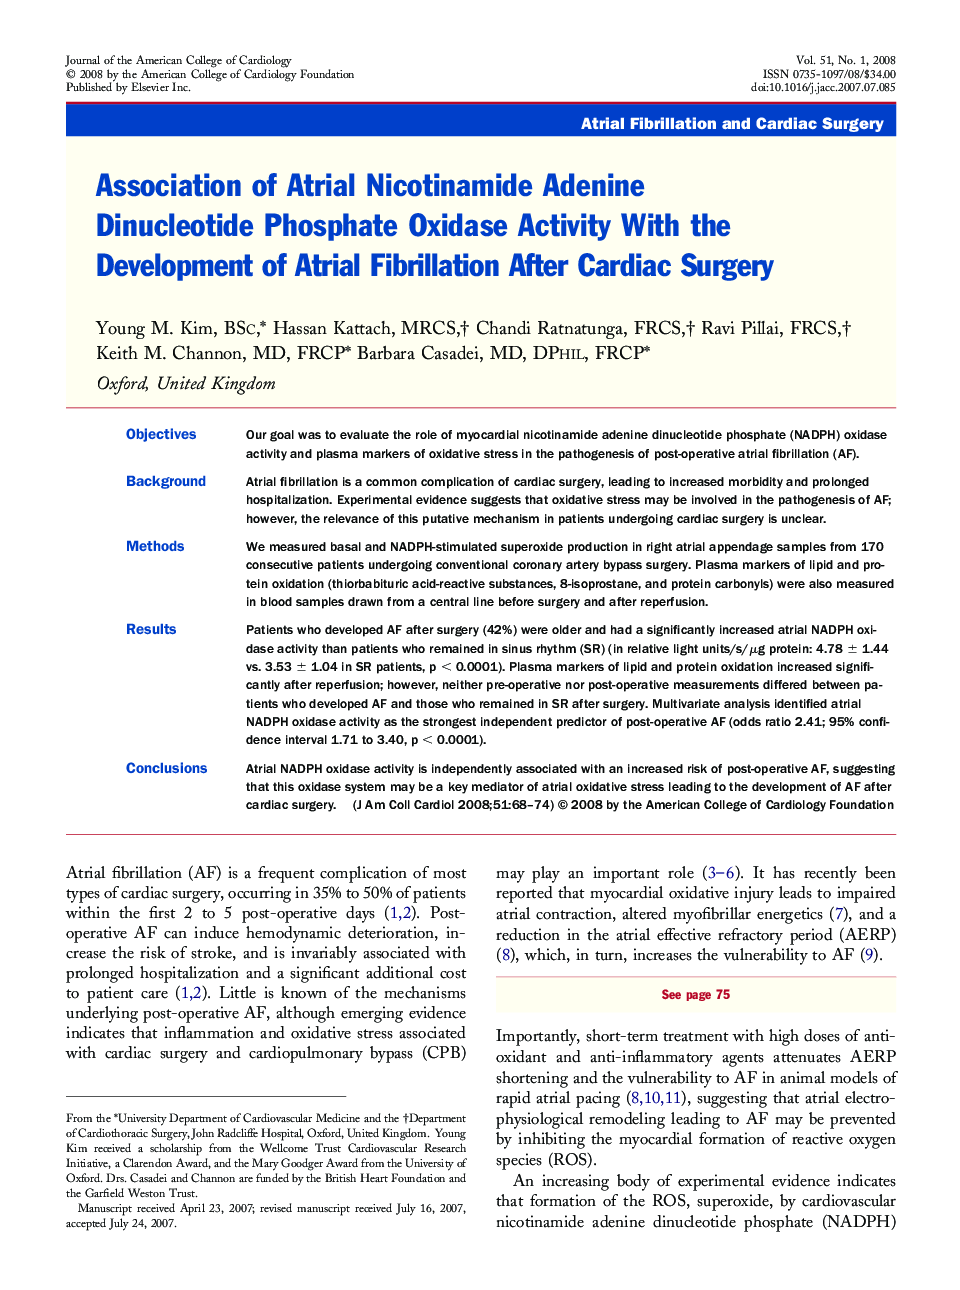 Association of Atrial Nicotinamide Adenine Dinucleotide Phosphate Oxidase Activity With the Development of Atrial Fibrillation After Cardiac Surgery